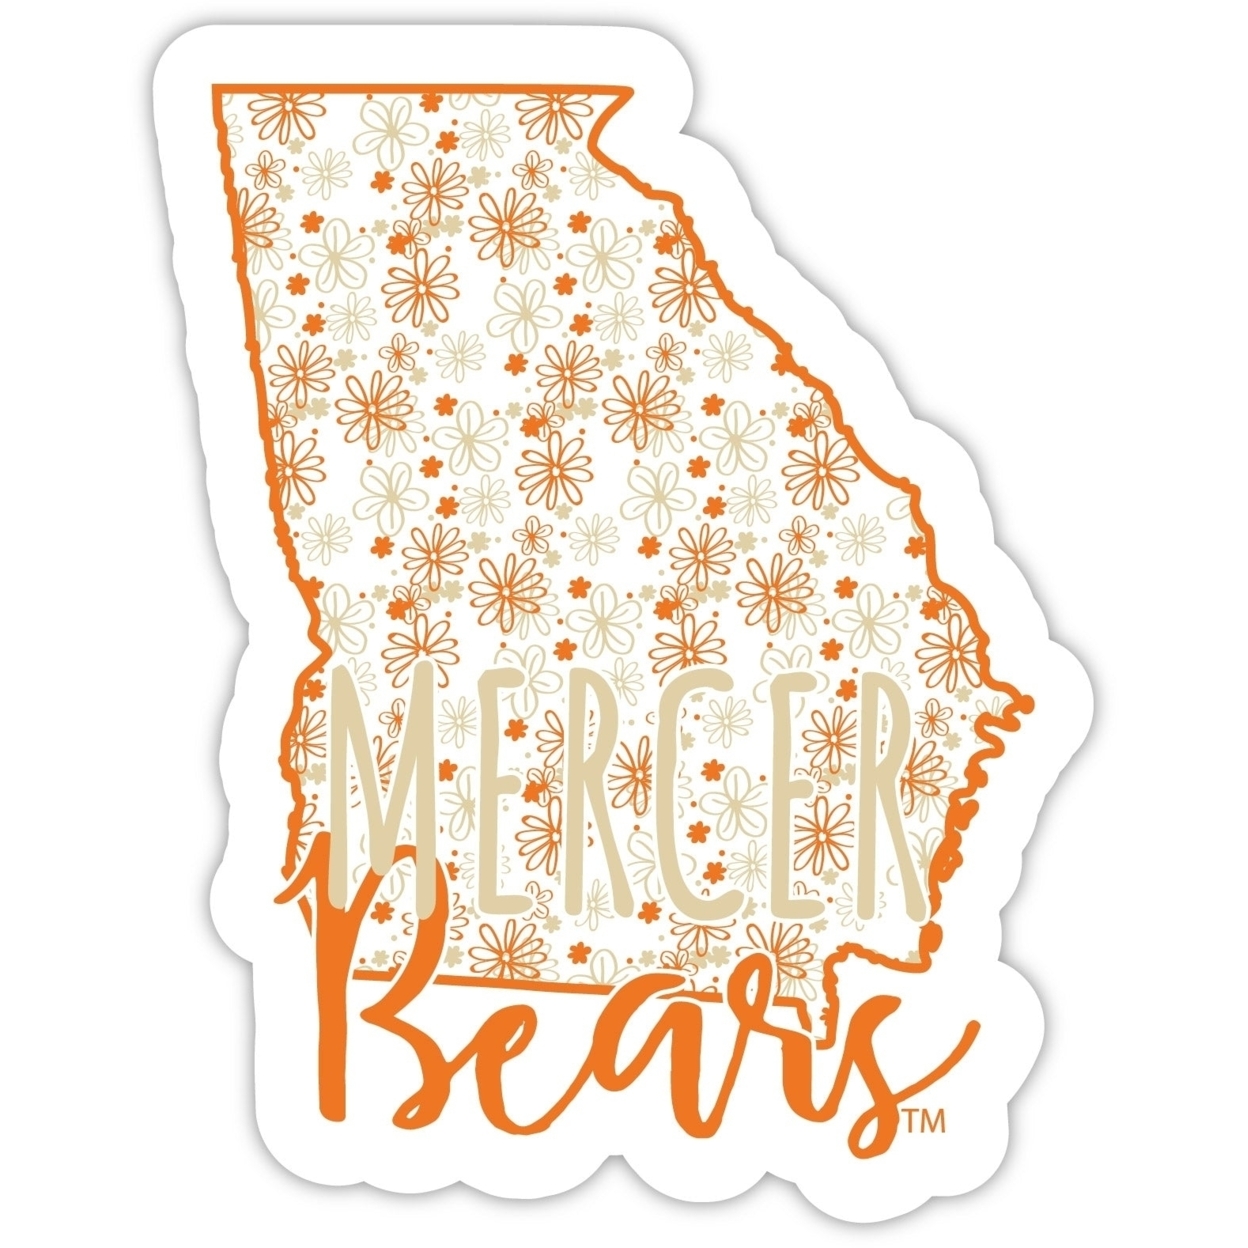 Mercer University Floral State Die Cut Decal 4-Inch